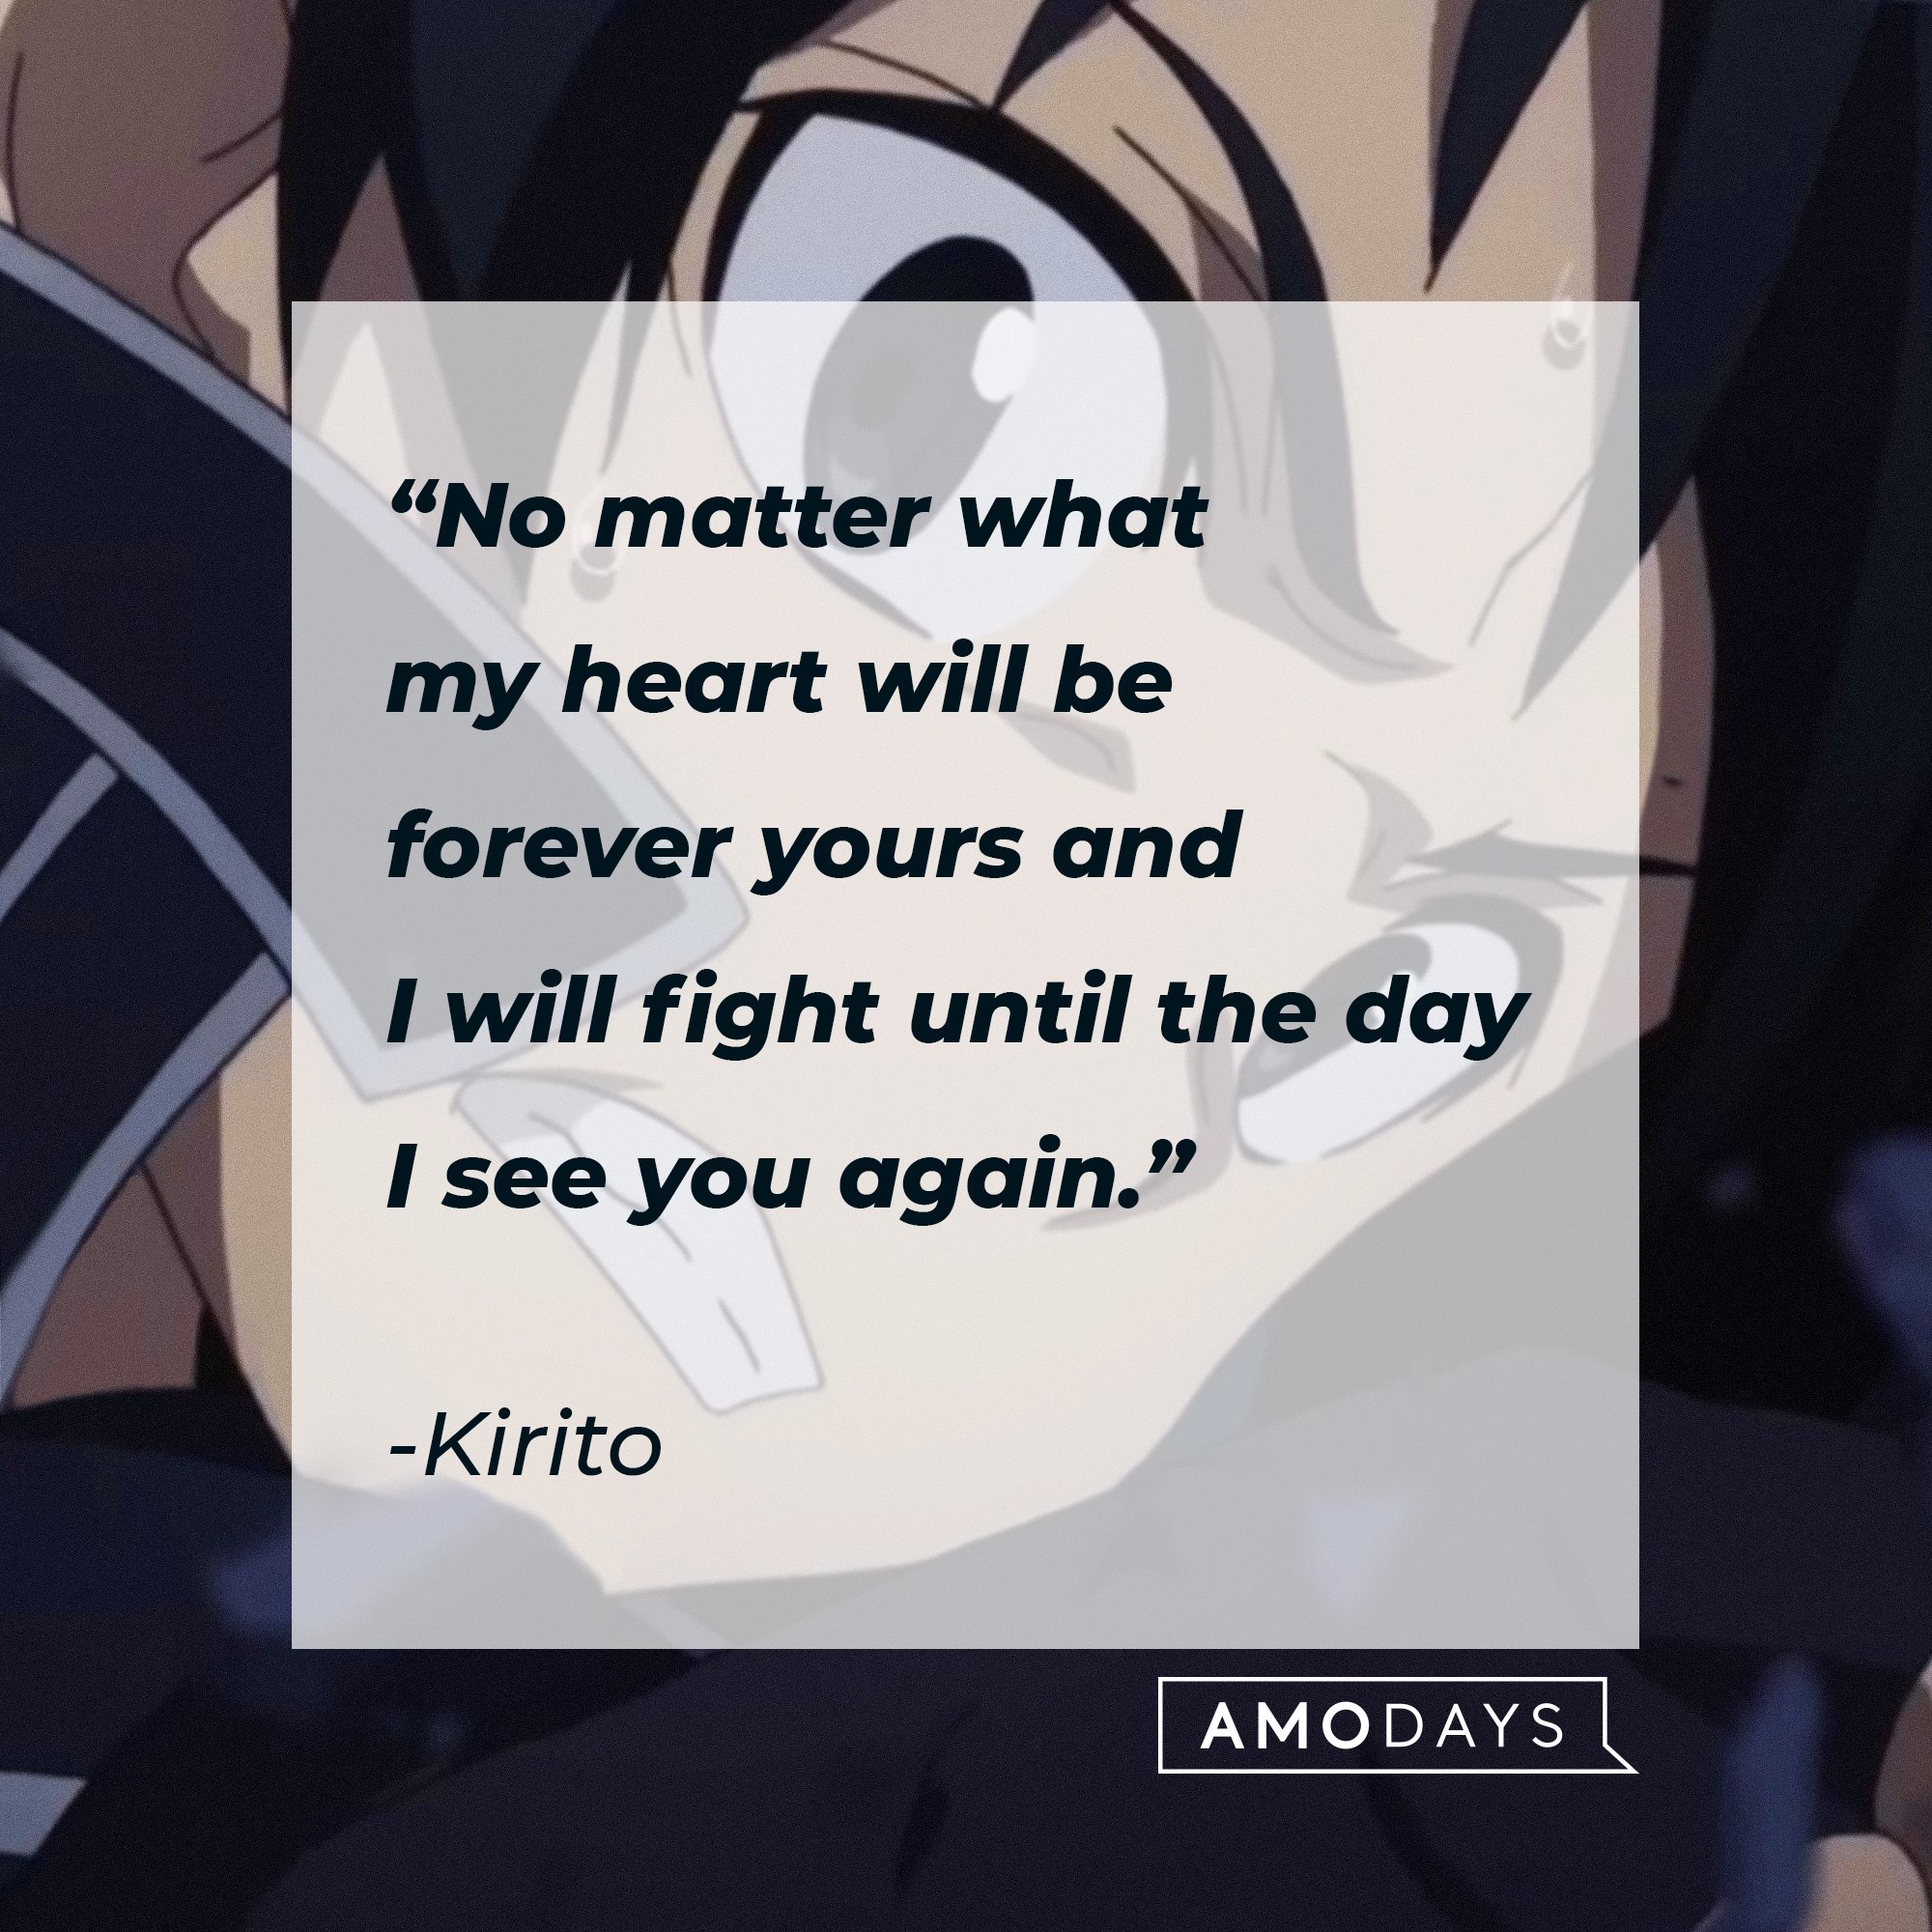 Kirito’s quote: “No matter what, my heart will be forever yours, and I will fight until the day I see you again.” | Image: AmoDays